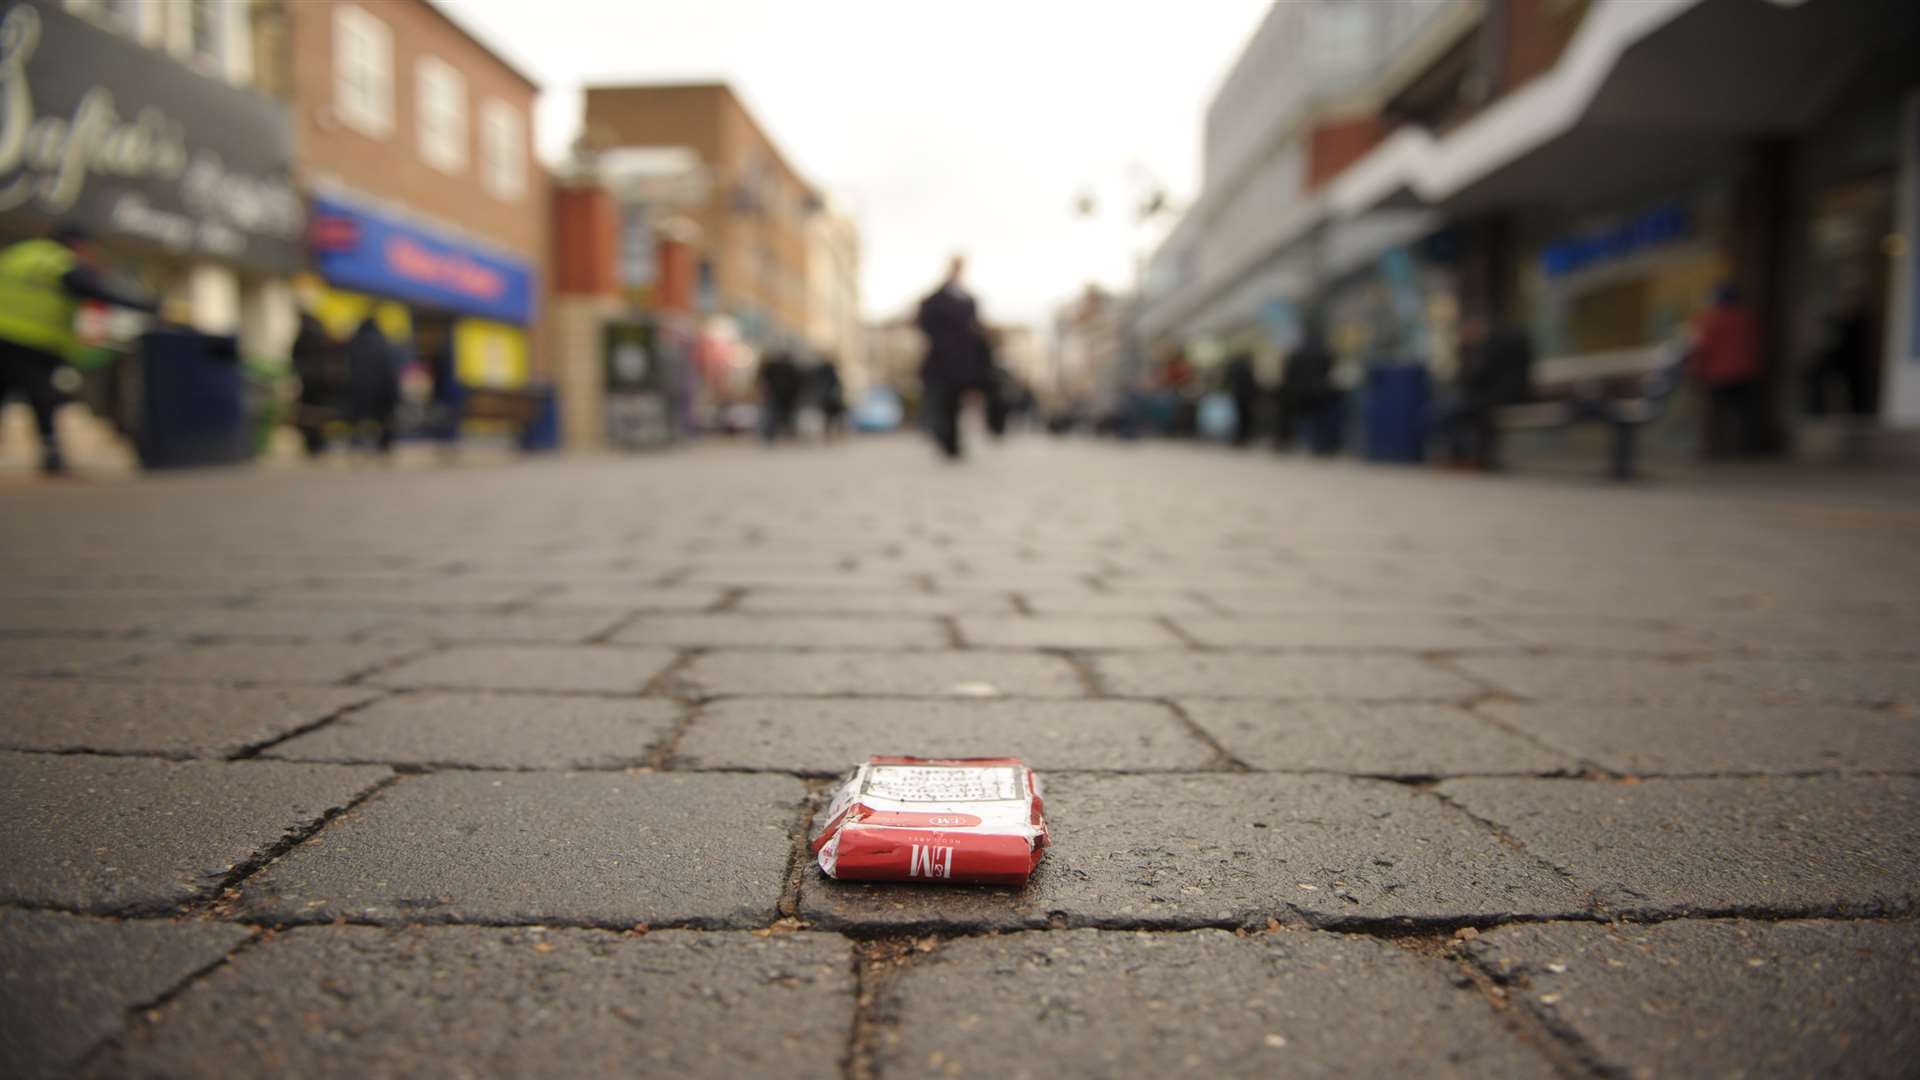 People have been fined for littering in Gravesend